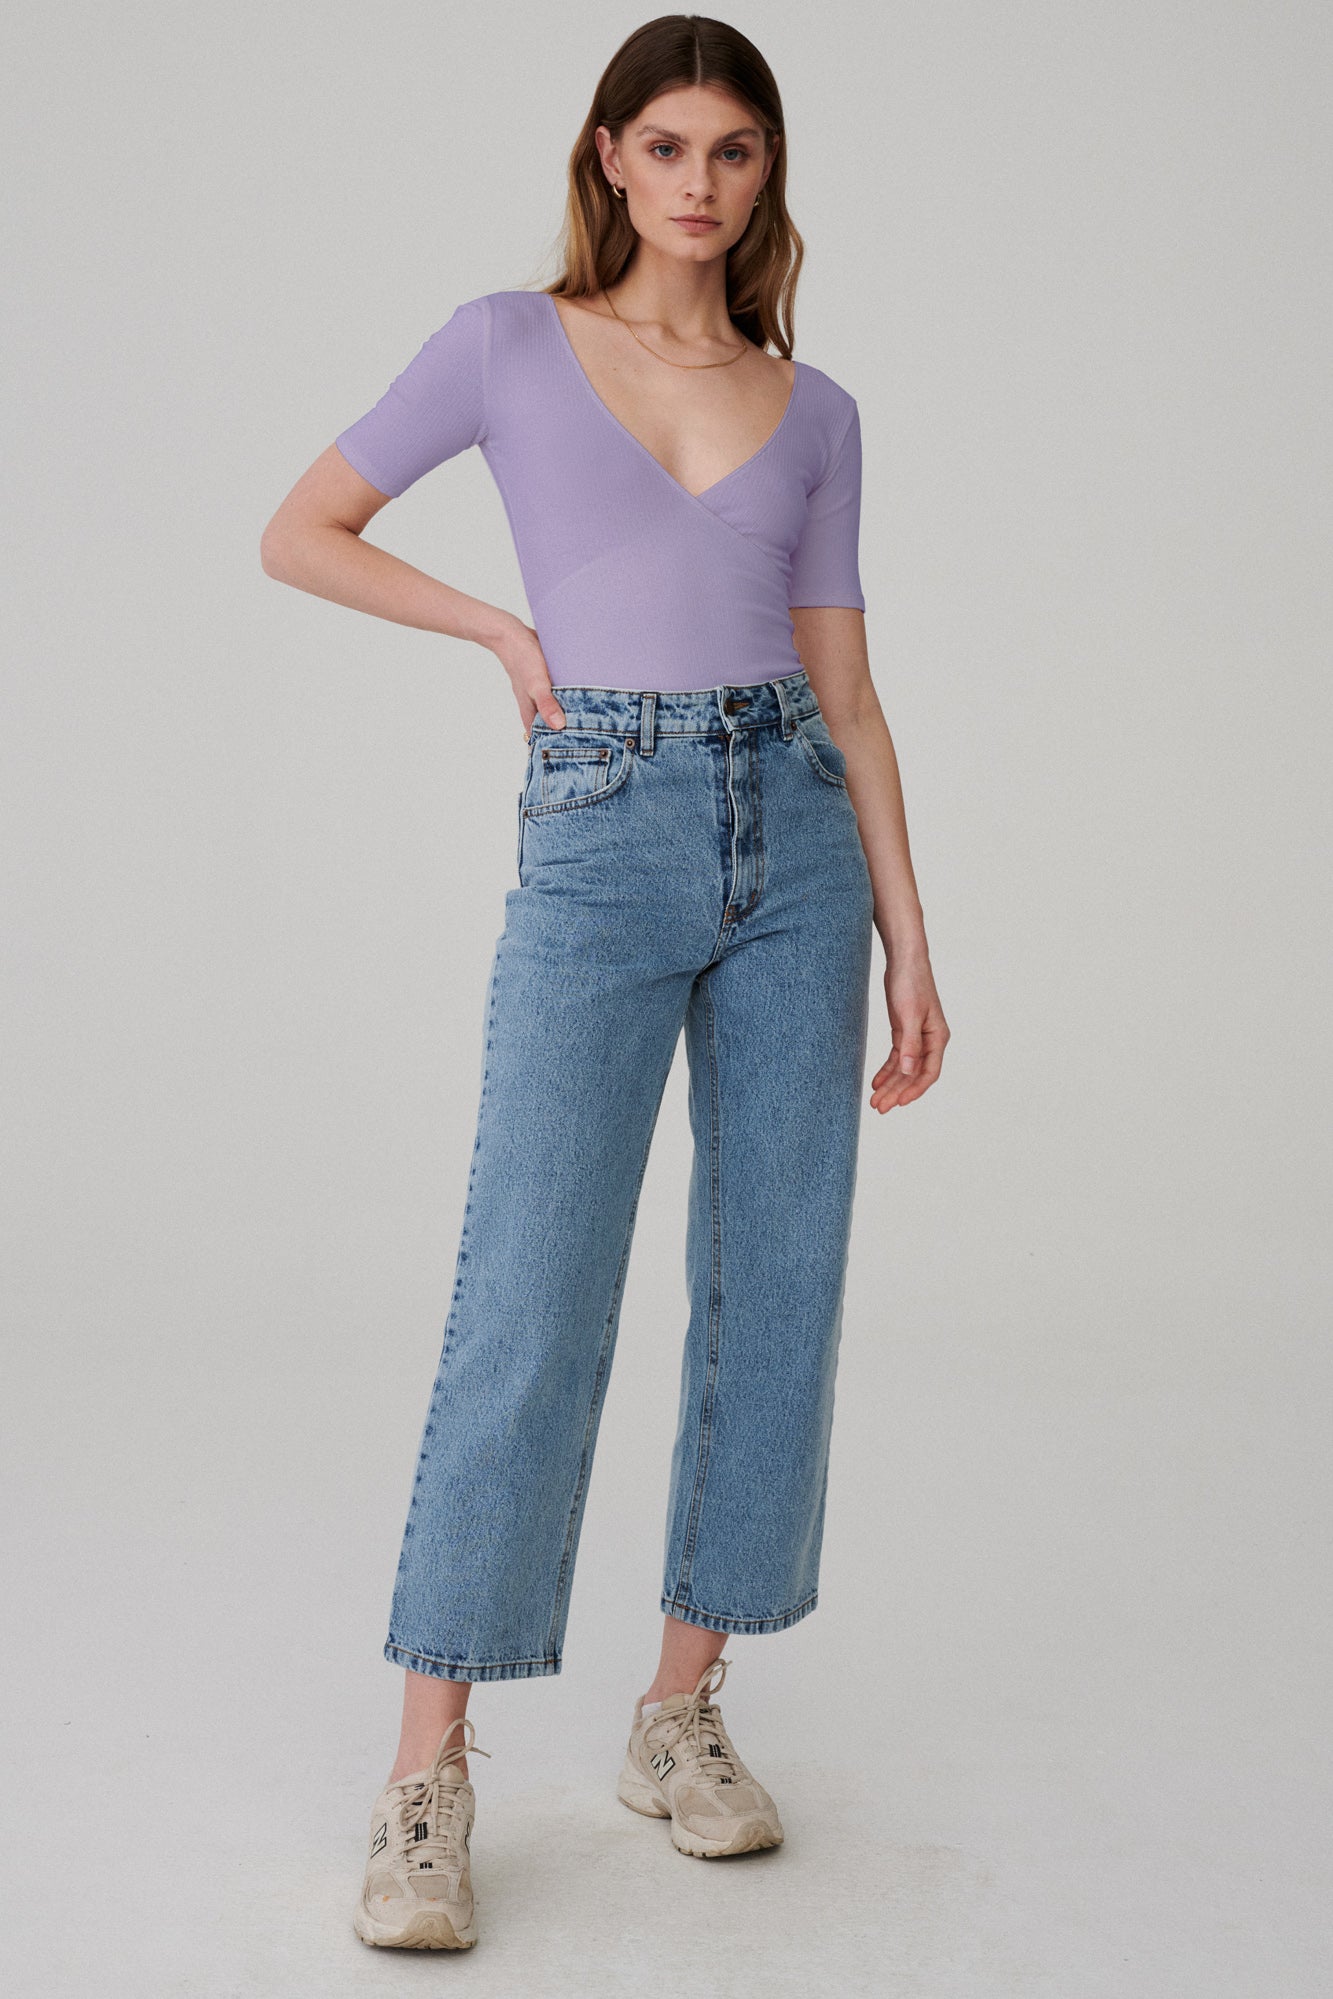 Bodysuit in organic cotton / 01 / 04 / acai fruit *cropped-jeans-from-recycled-cotton-05-12* ?The model is 177 cm high and wears size S?